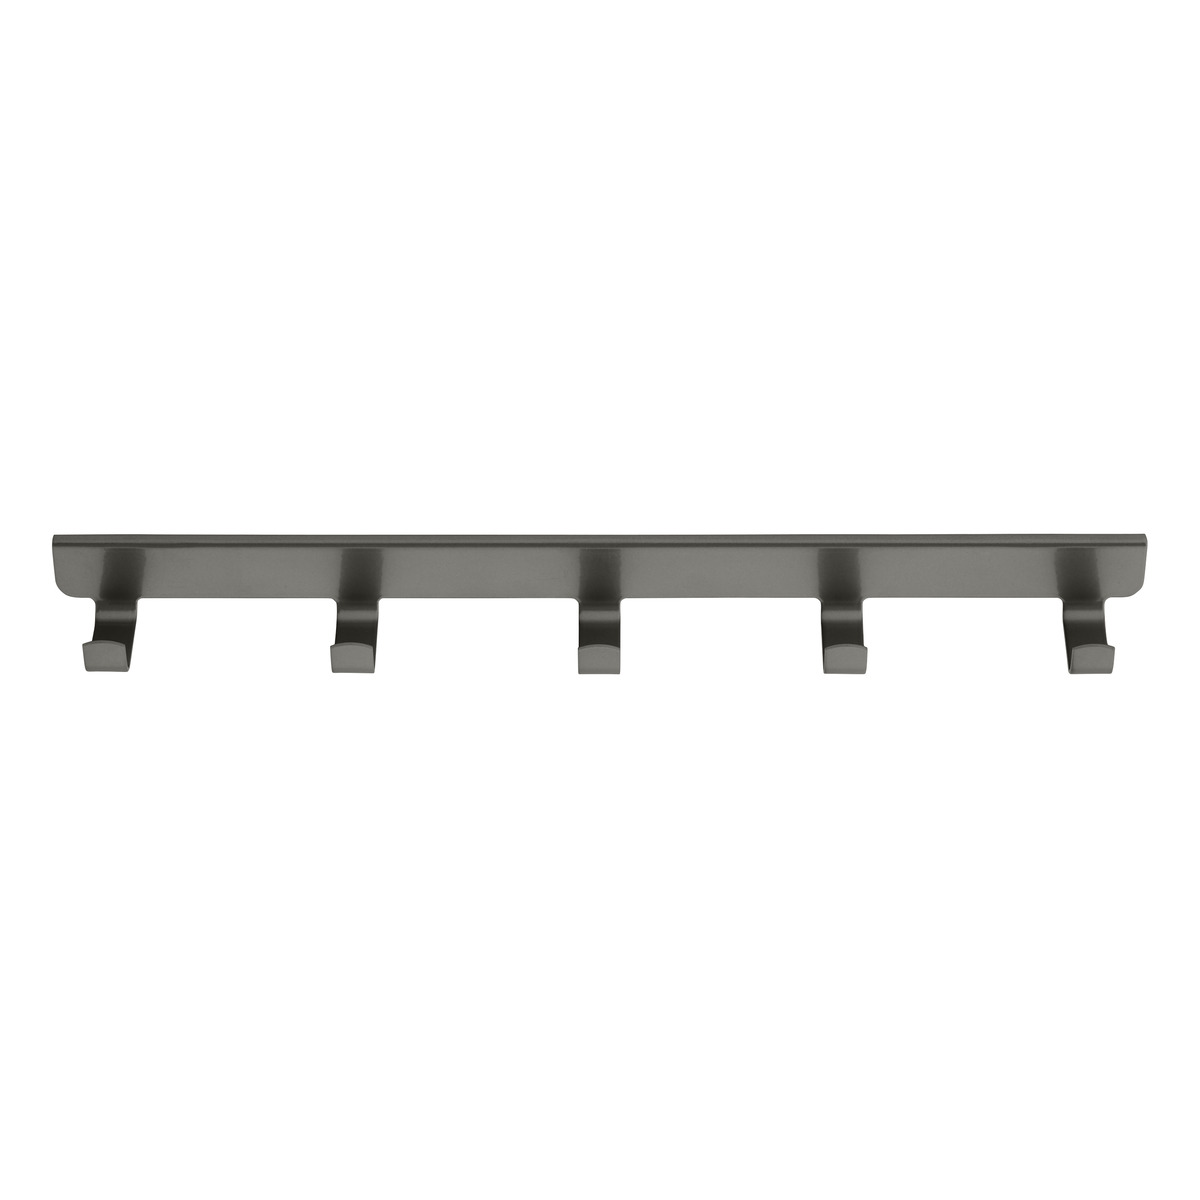 Elfa Ventilated Wire Shelf Bracket Hooks | The Container Store